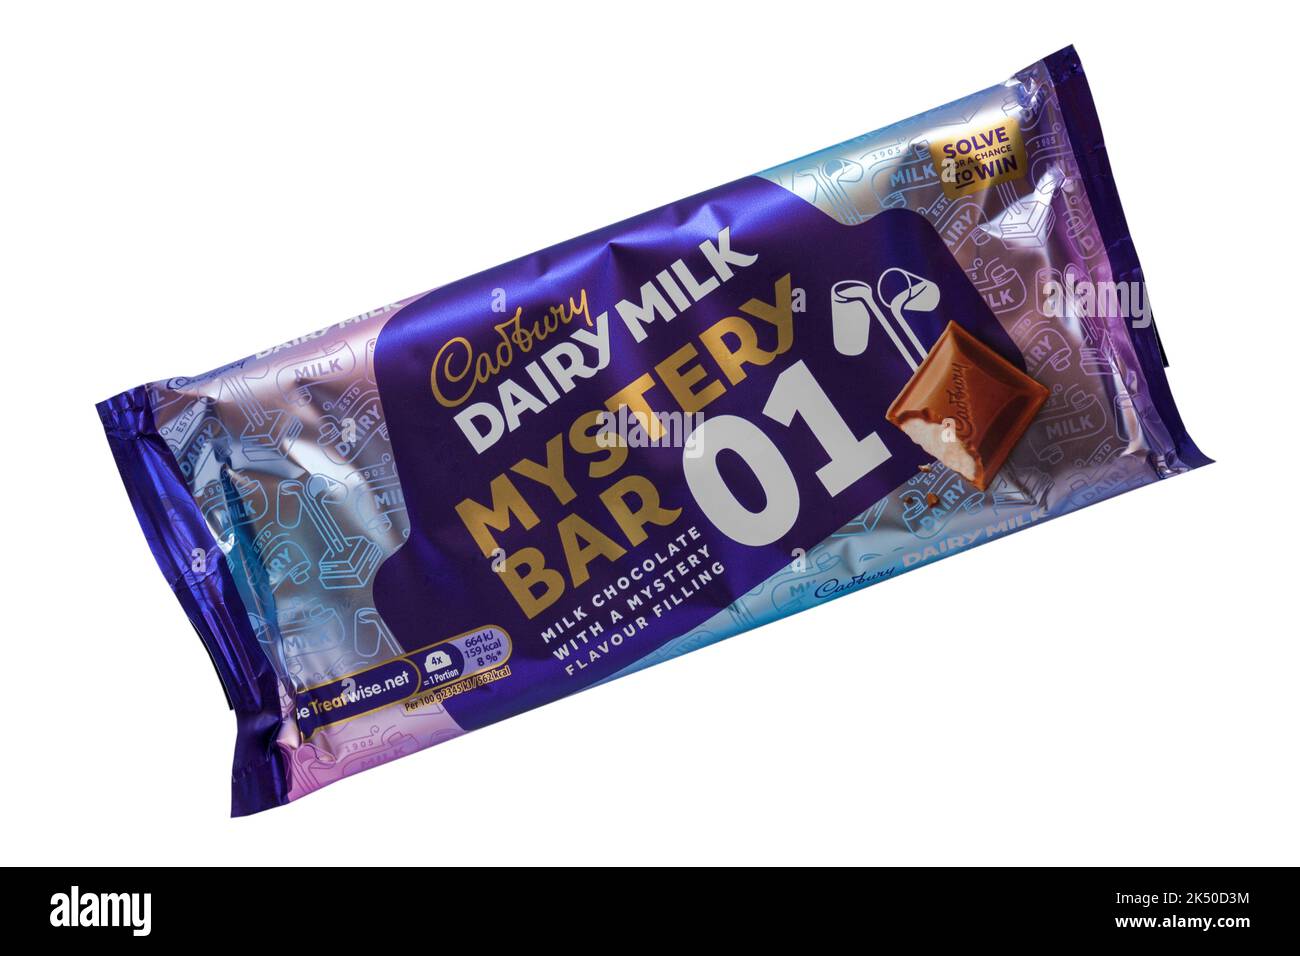 Cadbury Dairy Milk Mystery Bar 01 milk chocolate with a mystery flavour filling chocolate bar isolated on white background Stock Photo